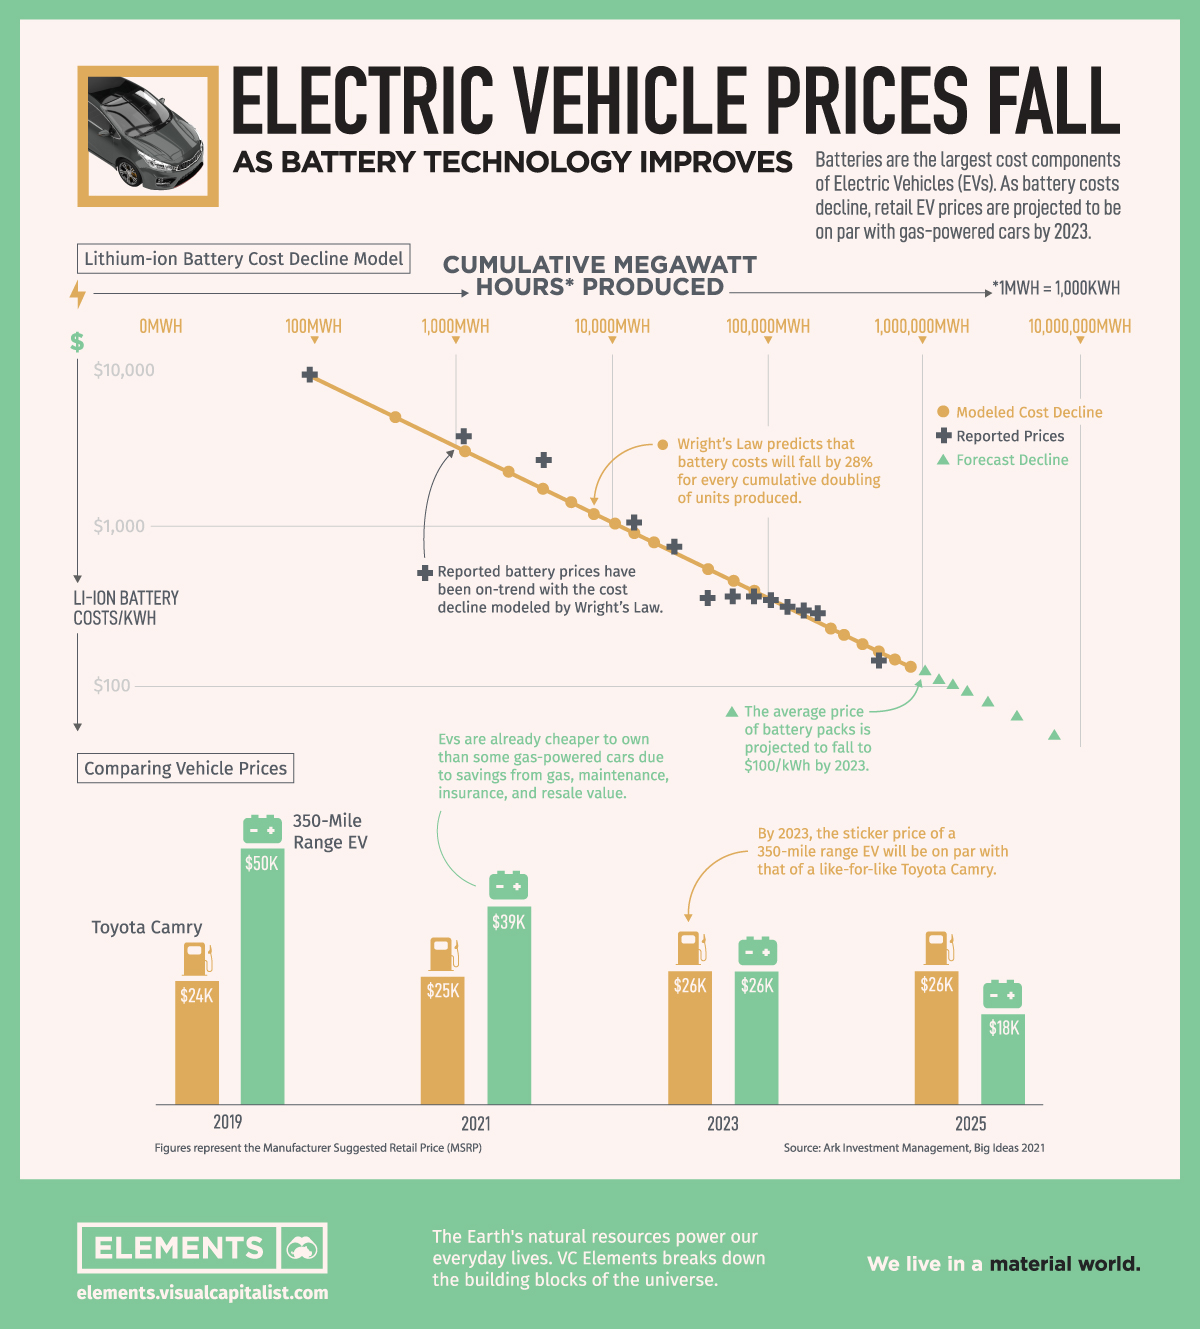 The Freefall in Electric Vehicle Prices